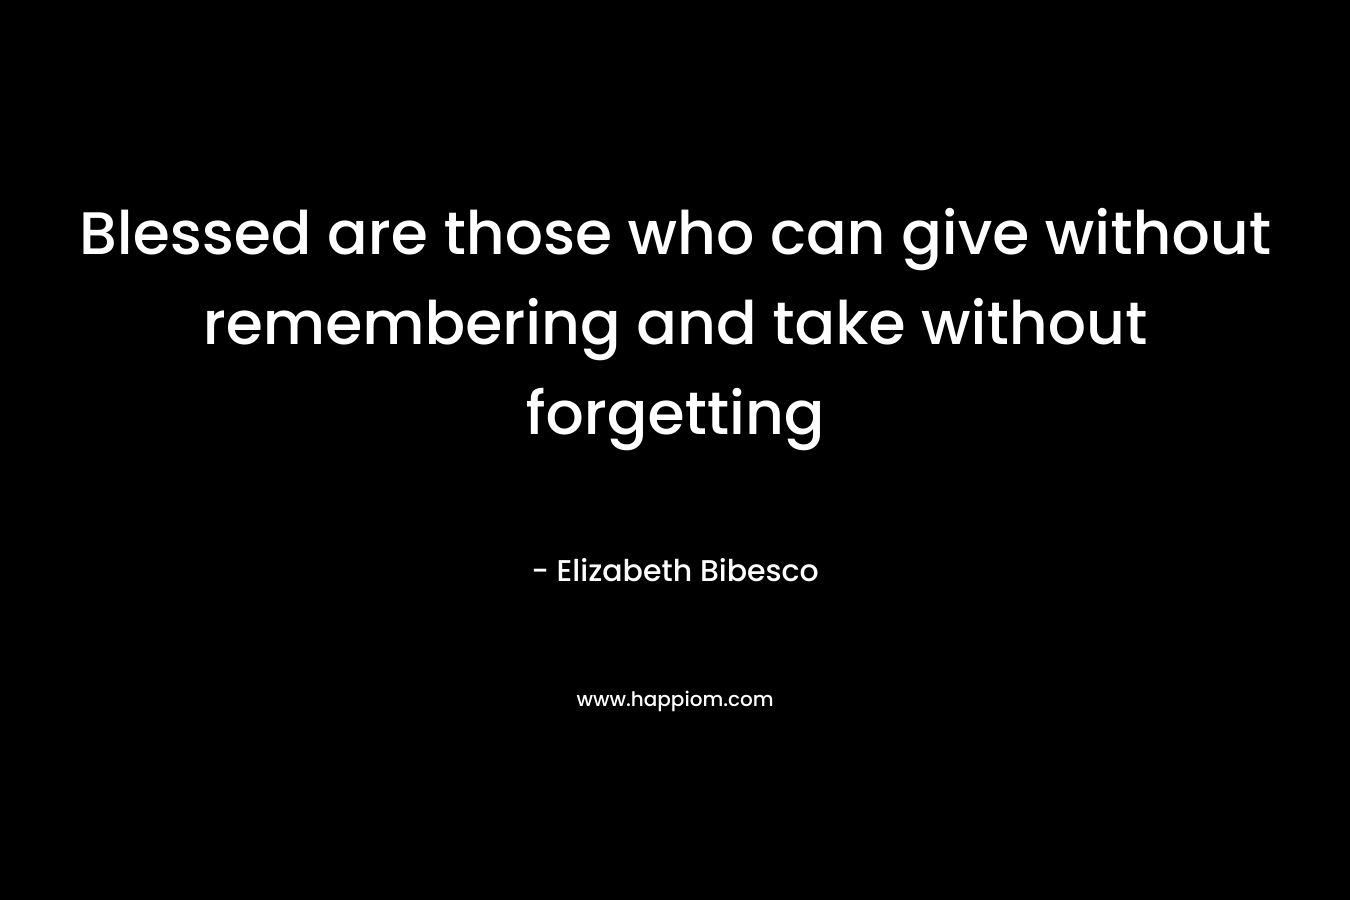 Blessed are those who can give without remembering and take without forgetting – Elizabeth Bibesco